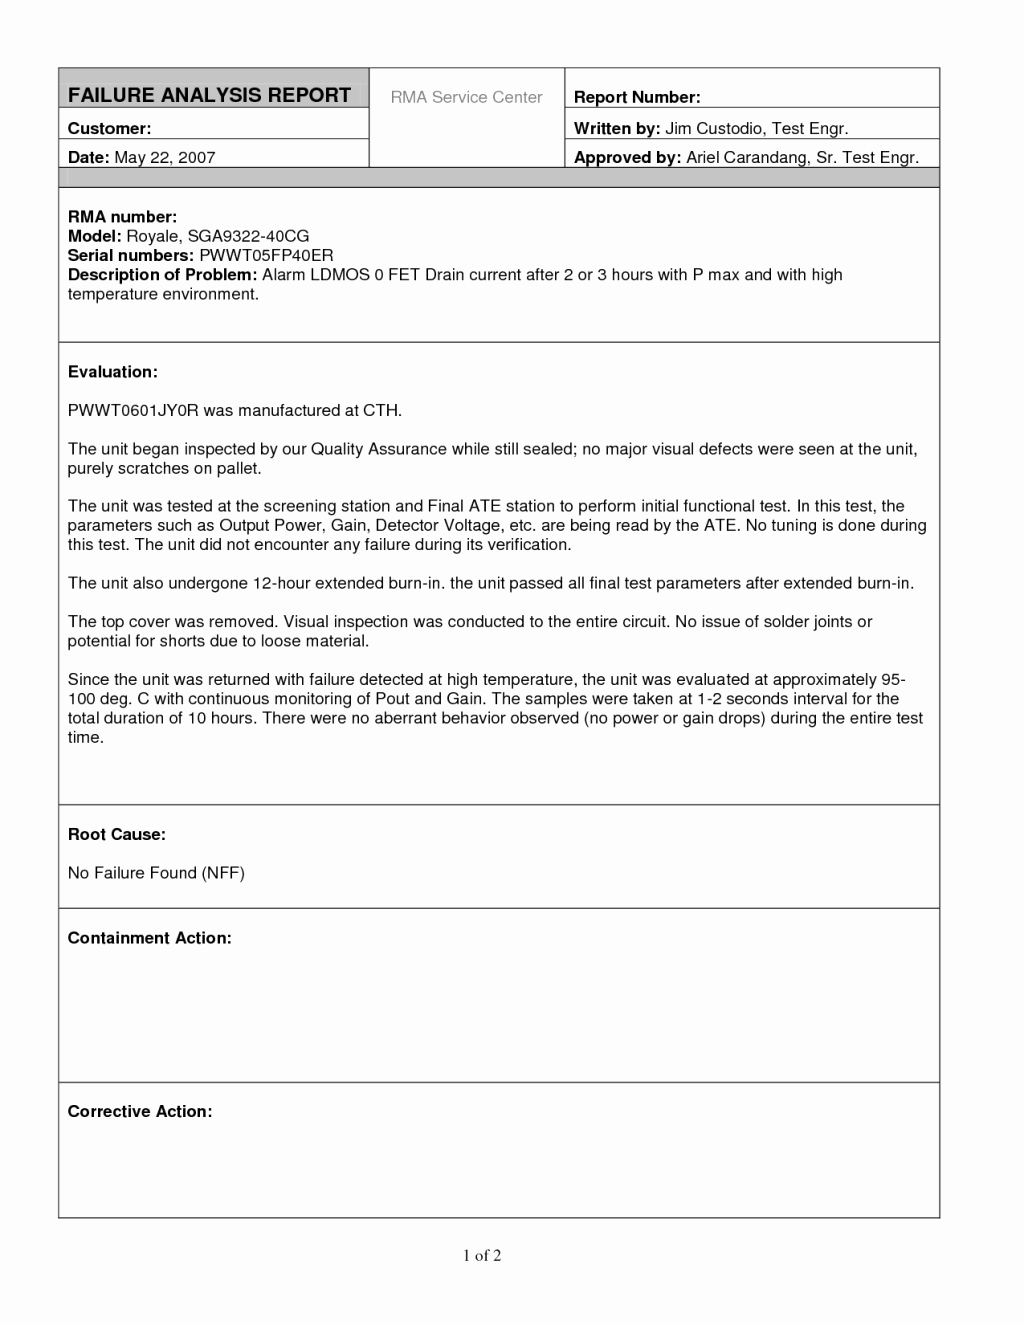 Failure Analysis Report Template Doc Elegant Editable Report Template Sample for Failure Analysis with